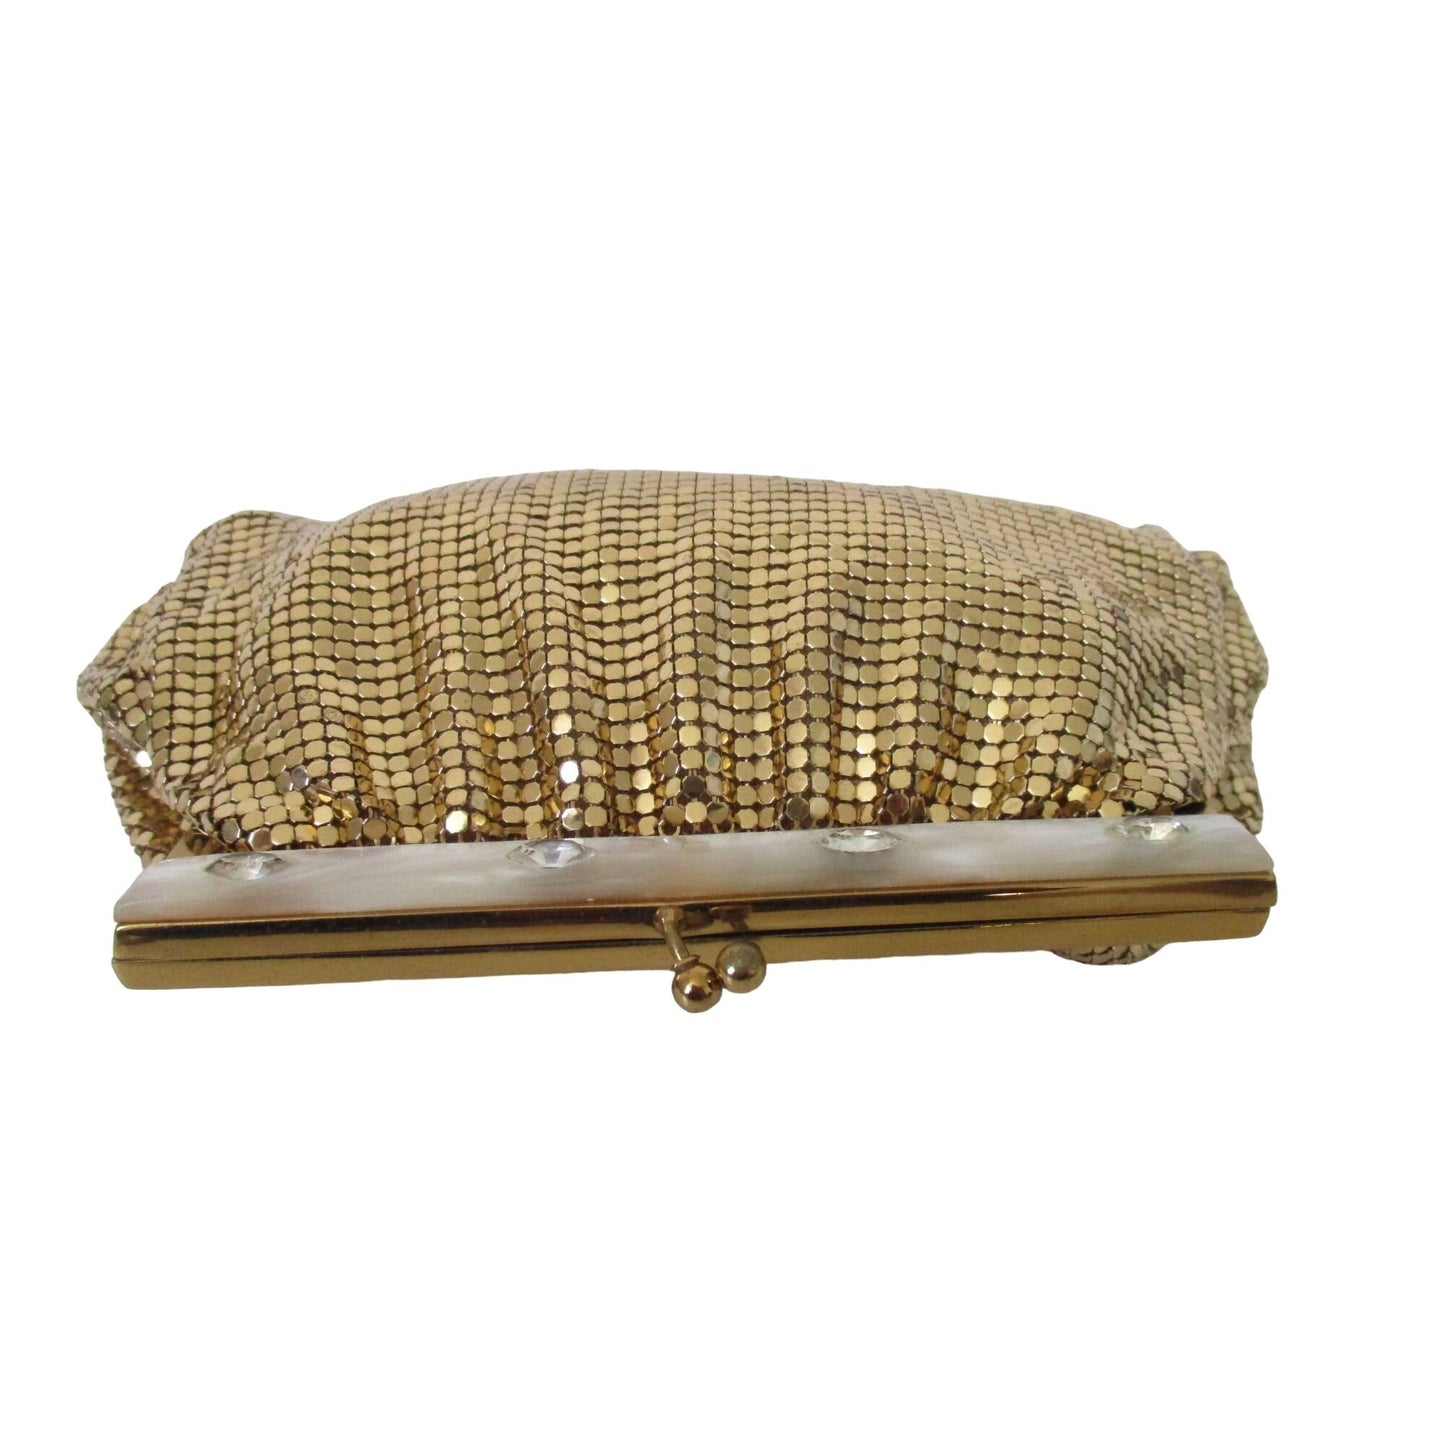 Mint Condition, Whiting and Davis, gold mirrored mesh, Art Deco, evening bag with a kiss closure & mother of pearl & rhinestone accents